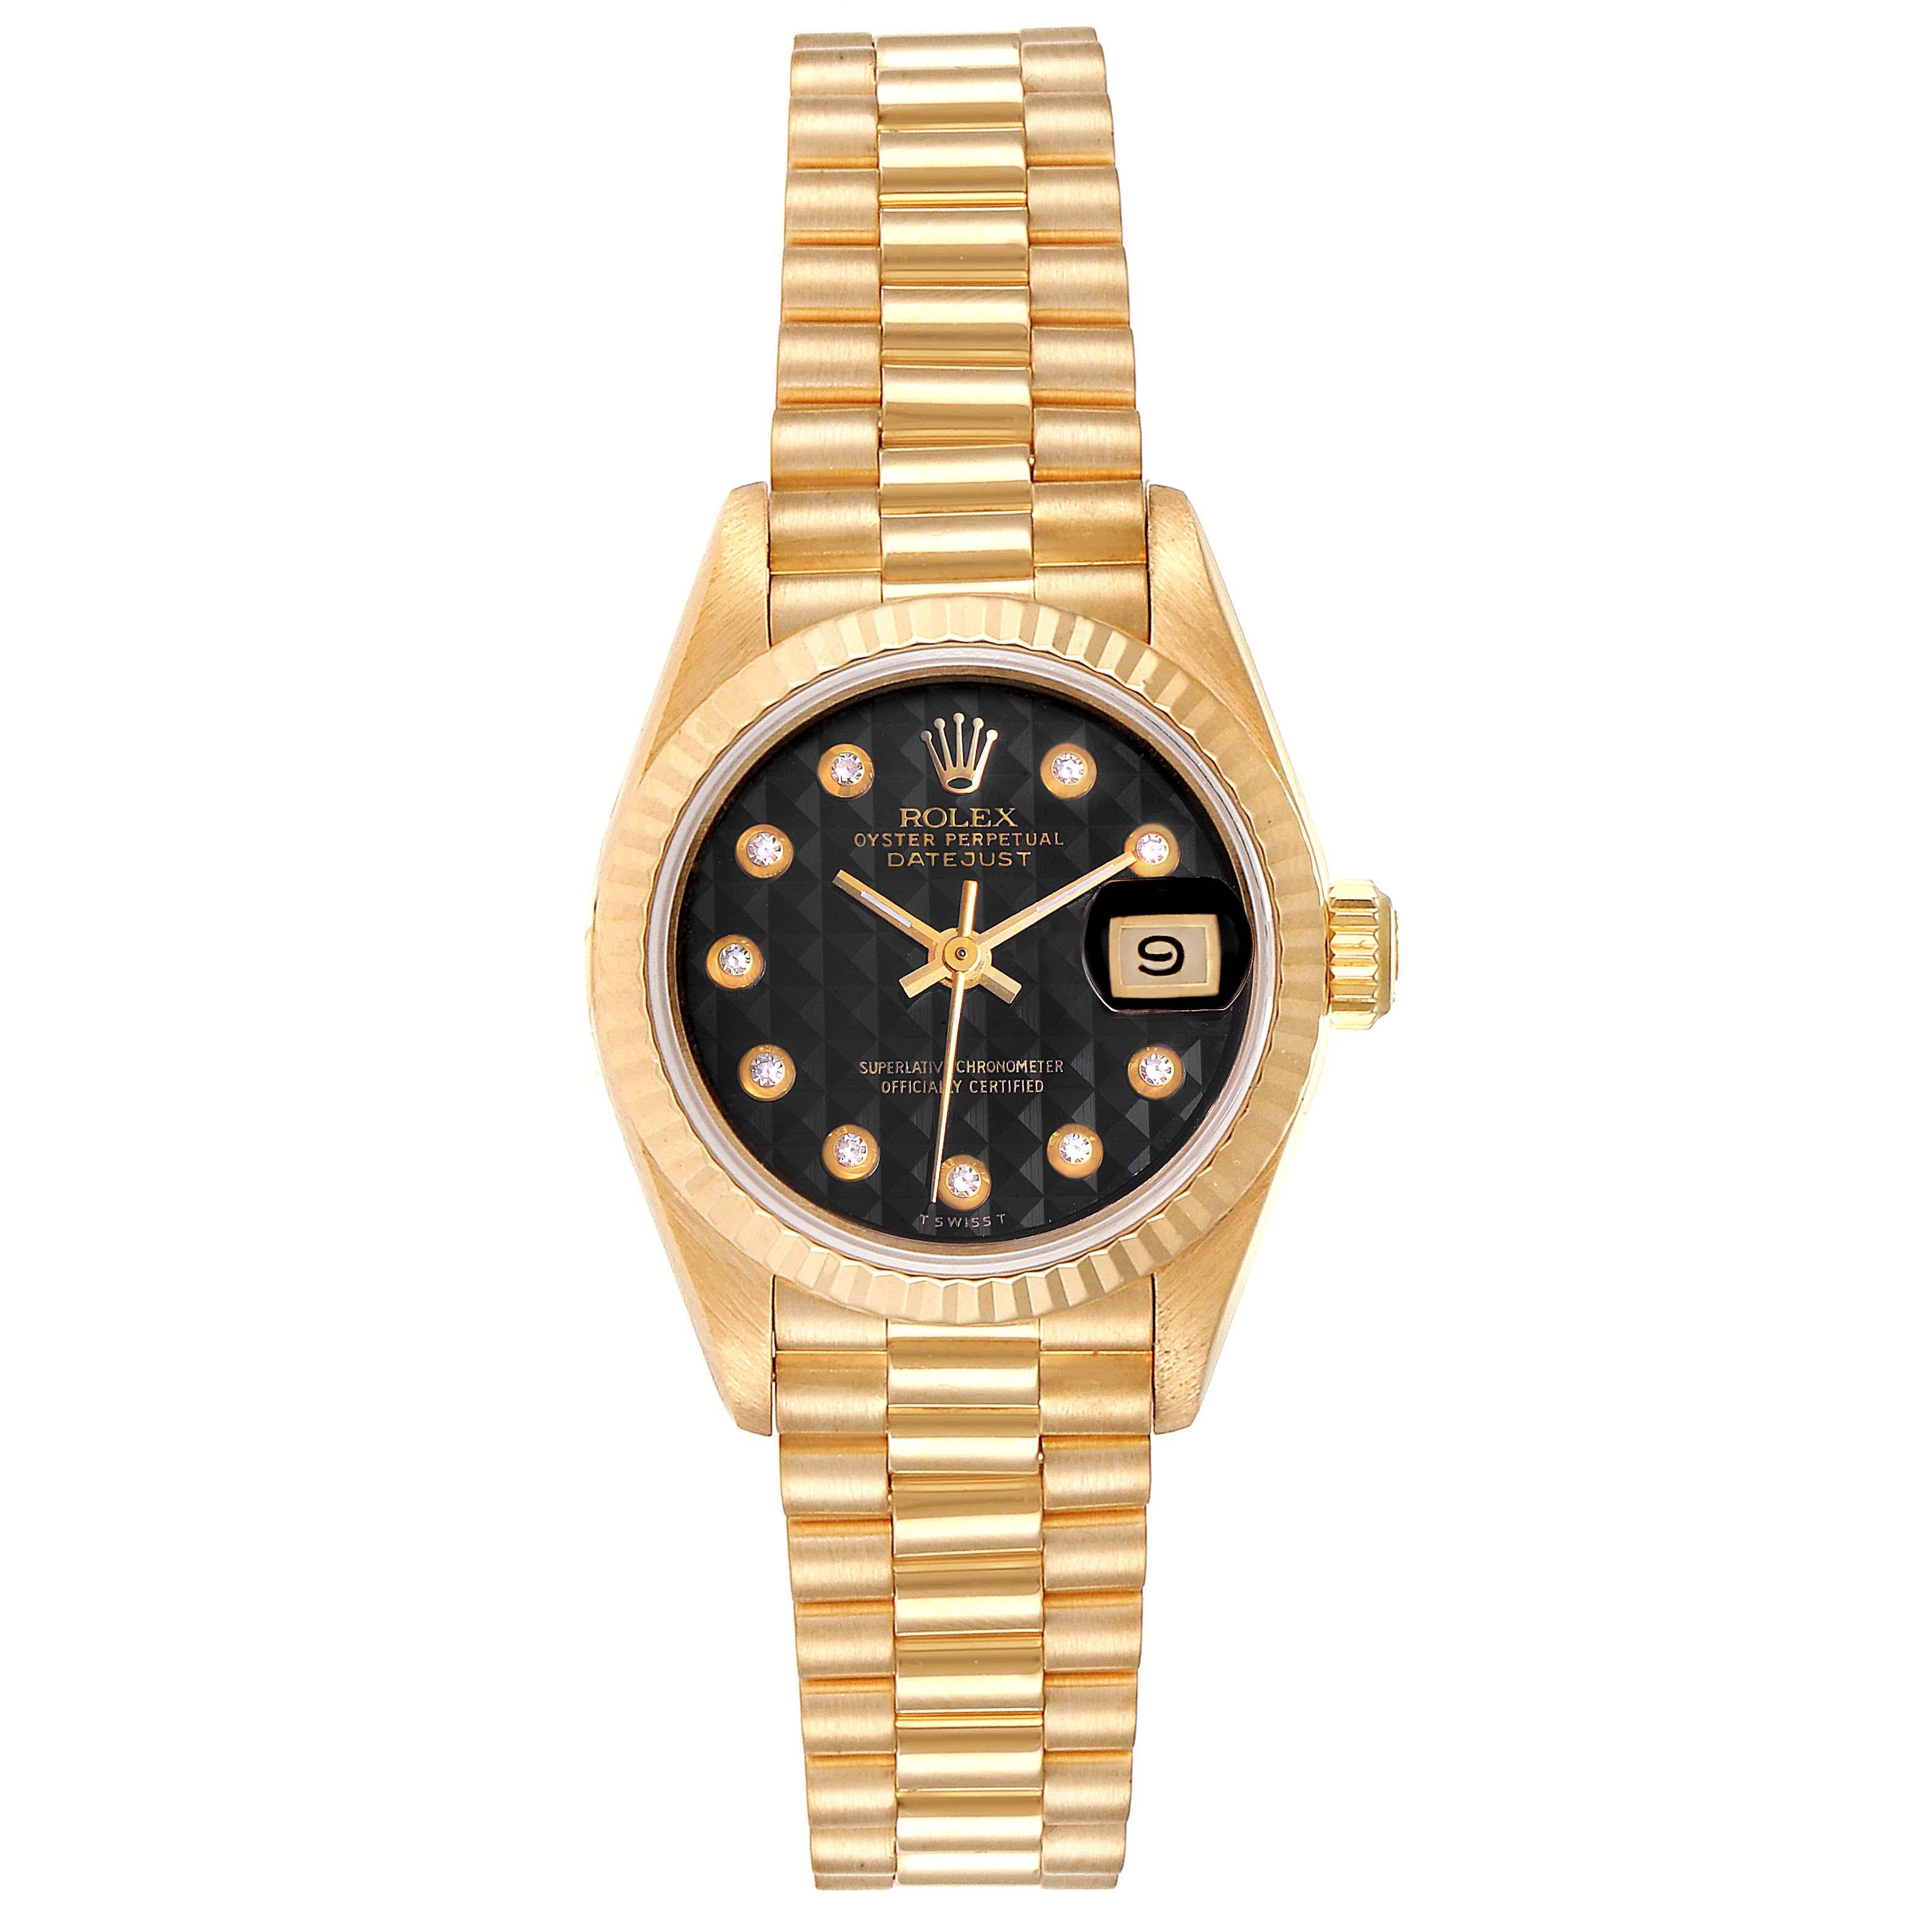 Rolex President Datejust Yellow Gold Onyx Diamond Dial Ladies Watch 69178. Officially certified chronometer self-winding movement. 18k yellow gold oyster case 26.0 mm in diameter. Rolex logo on a crown. 18k yellow gold fluted bezel. Scratch